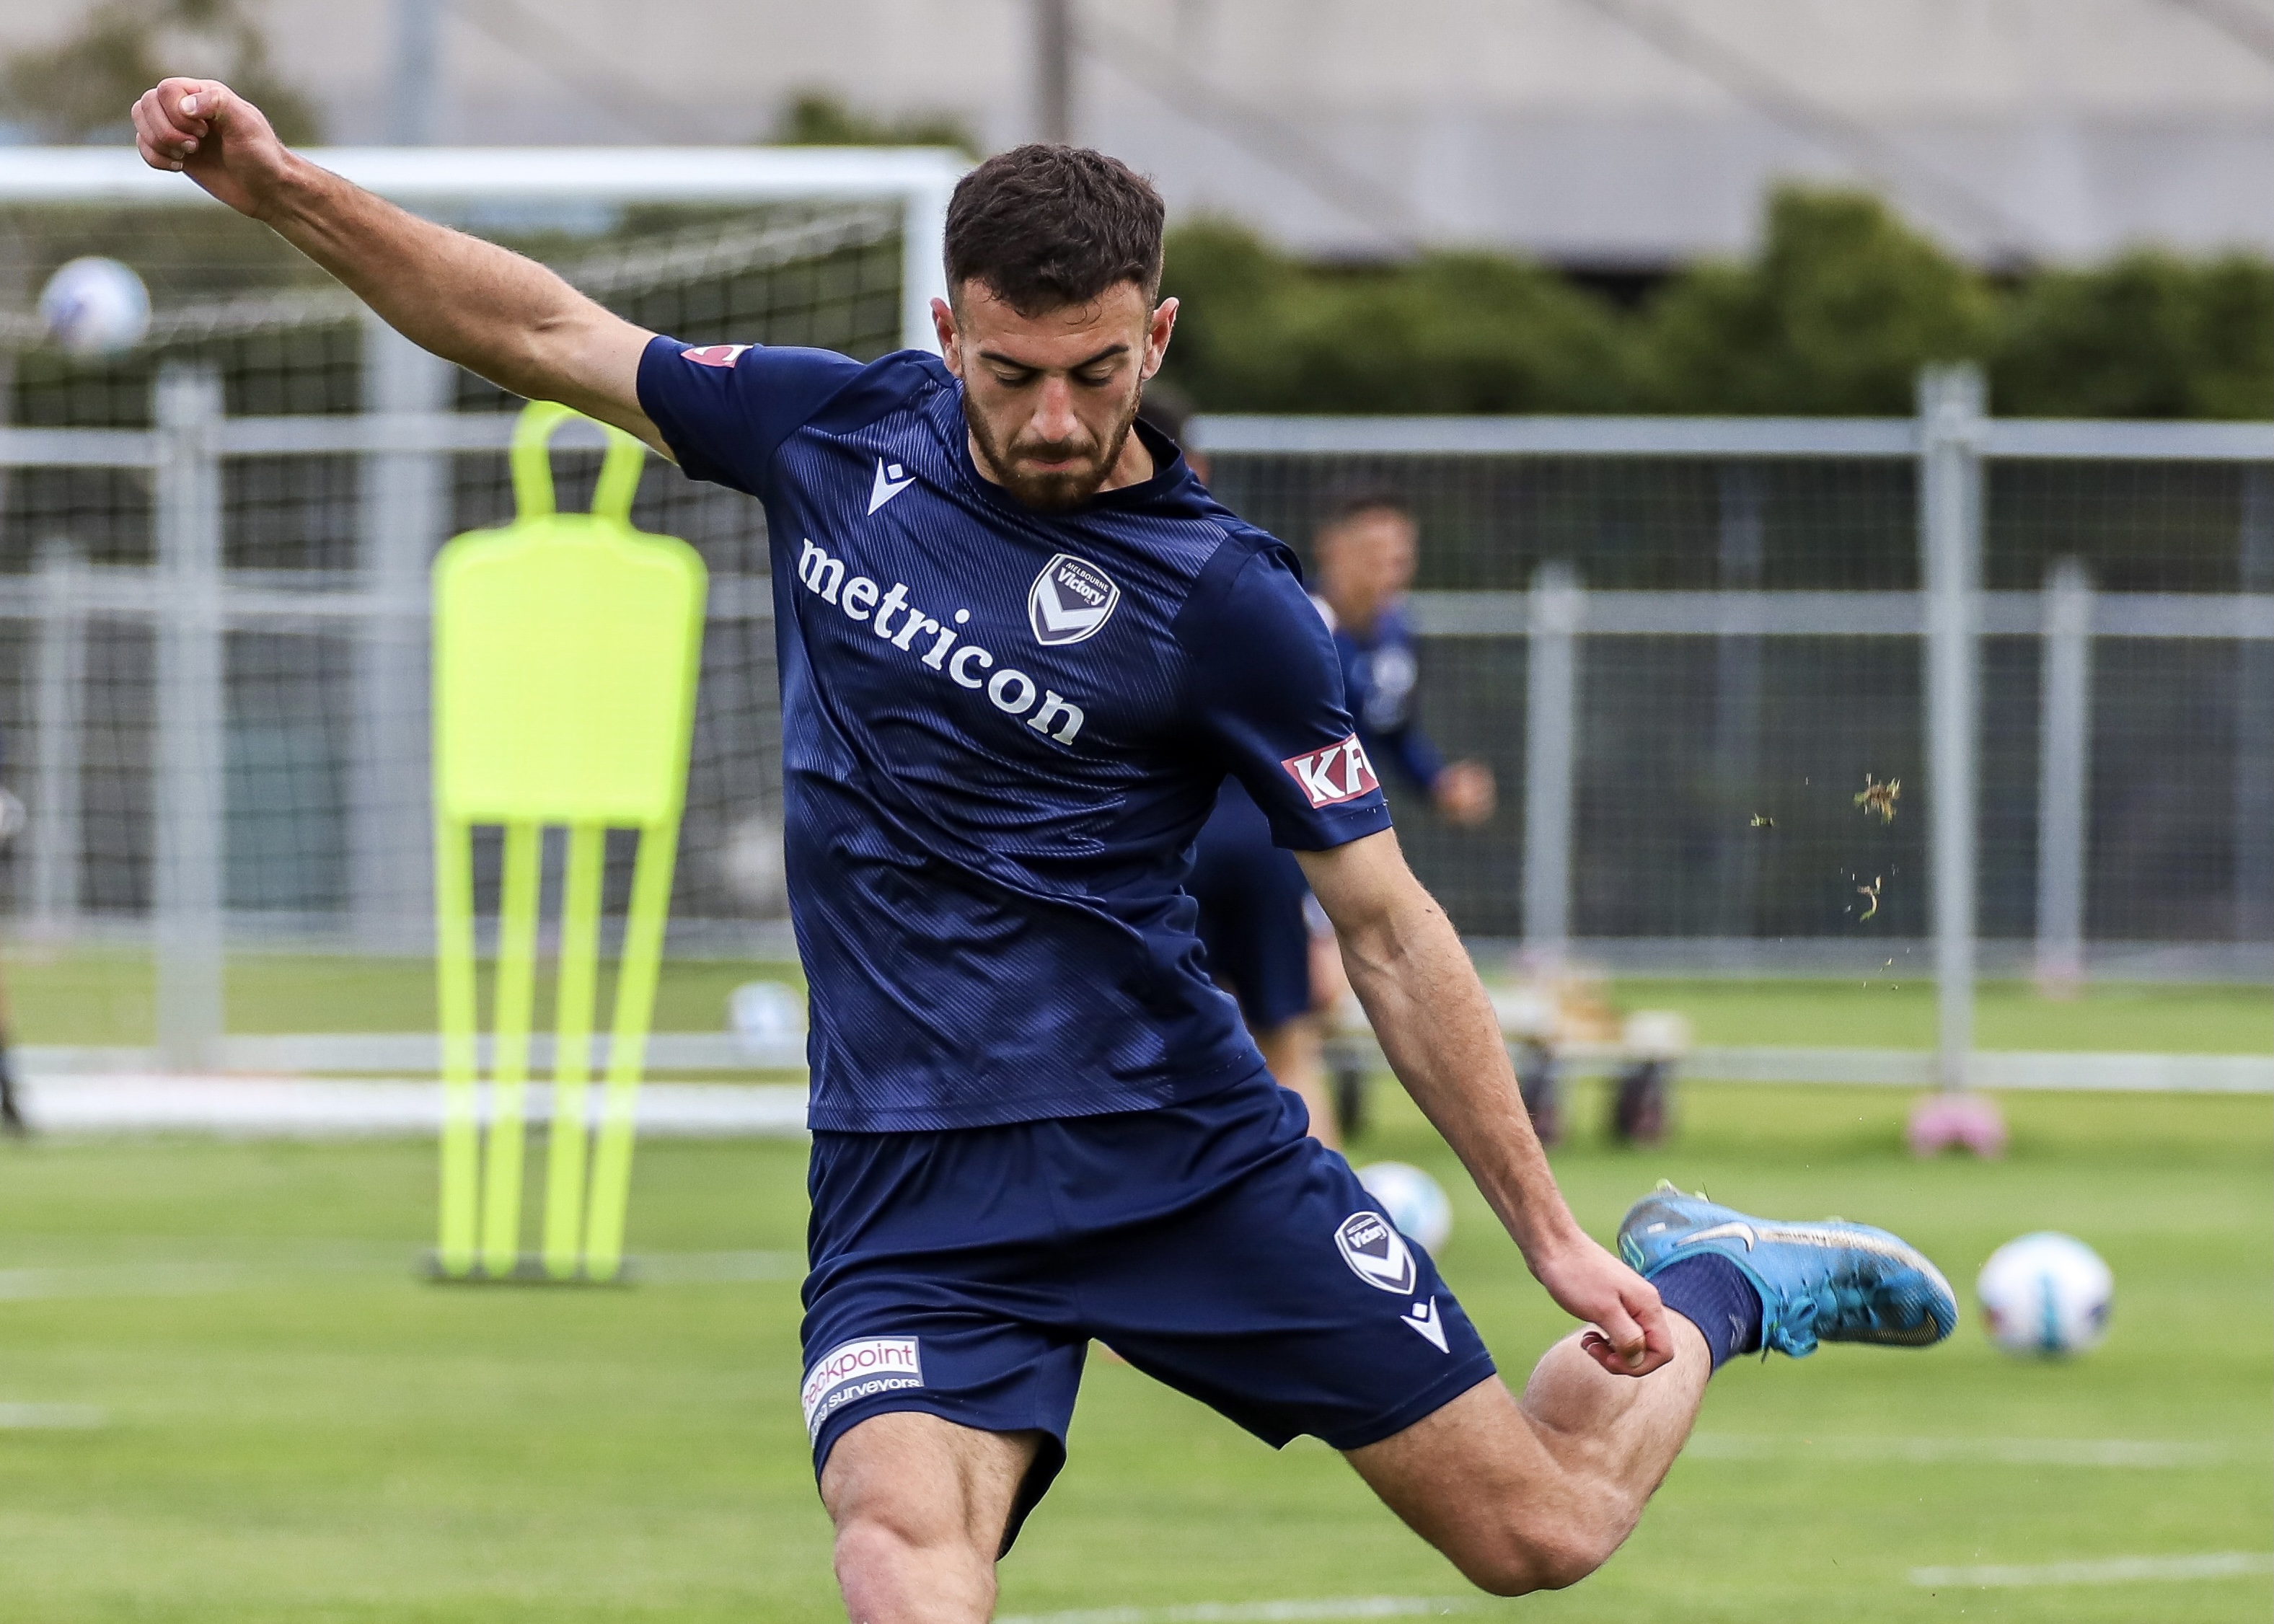 https://backend.melbournevictory.com.au/wp-content/uploads/sites/7/2021/08/IMG_4440.jpg